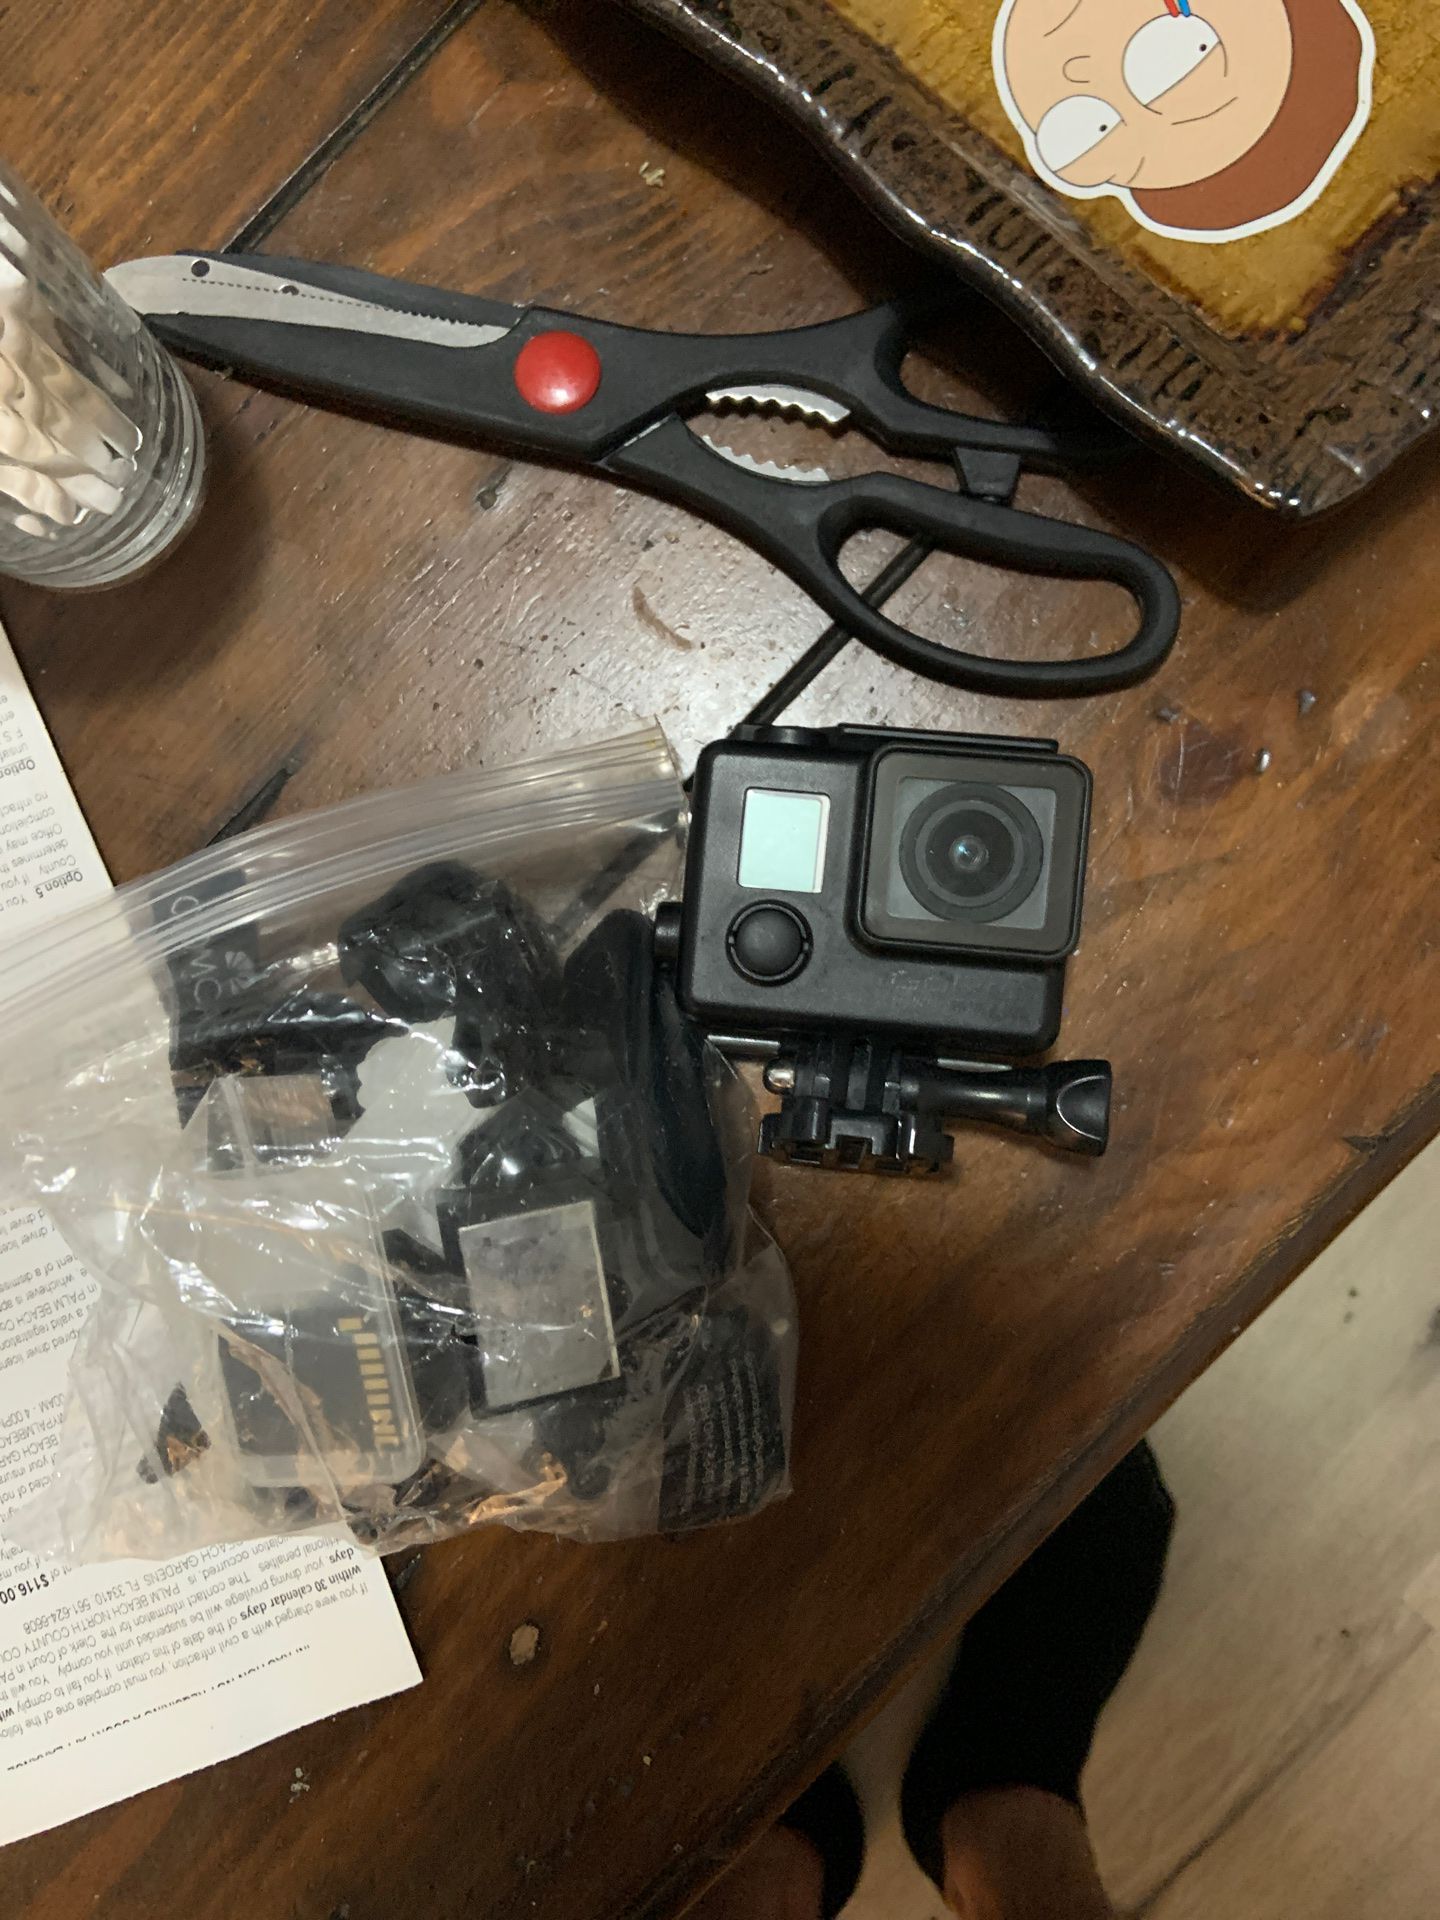 GoPro hero 3 with bag of extra batteries and parts